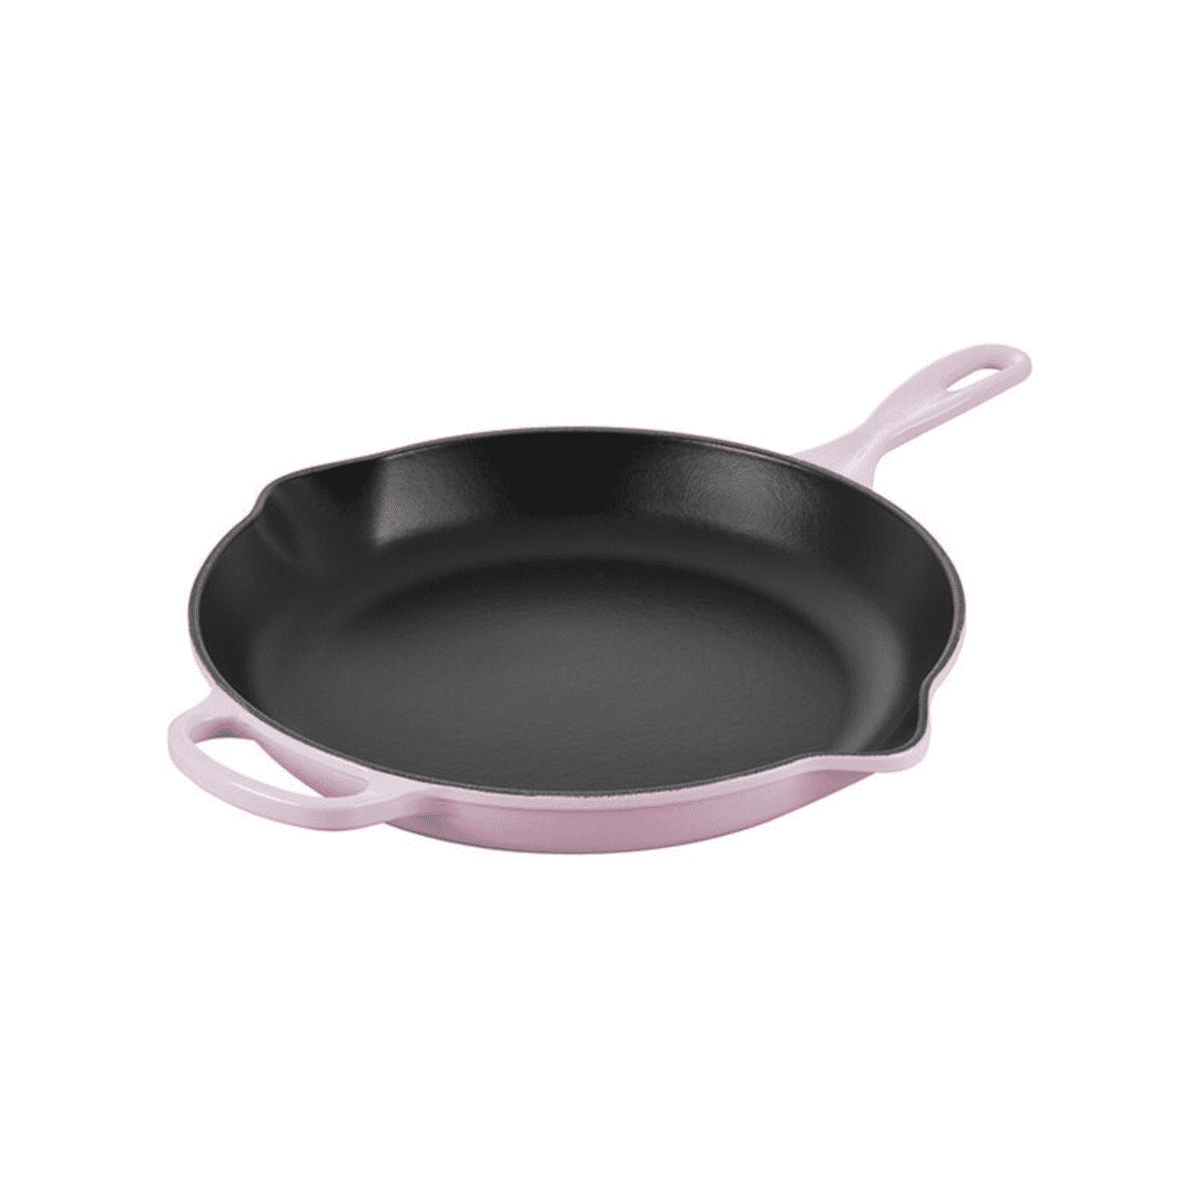 Le Creuset Cast Iron Skillet in Shallot